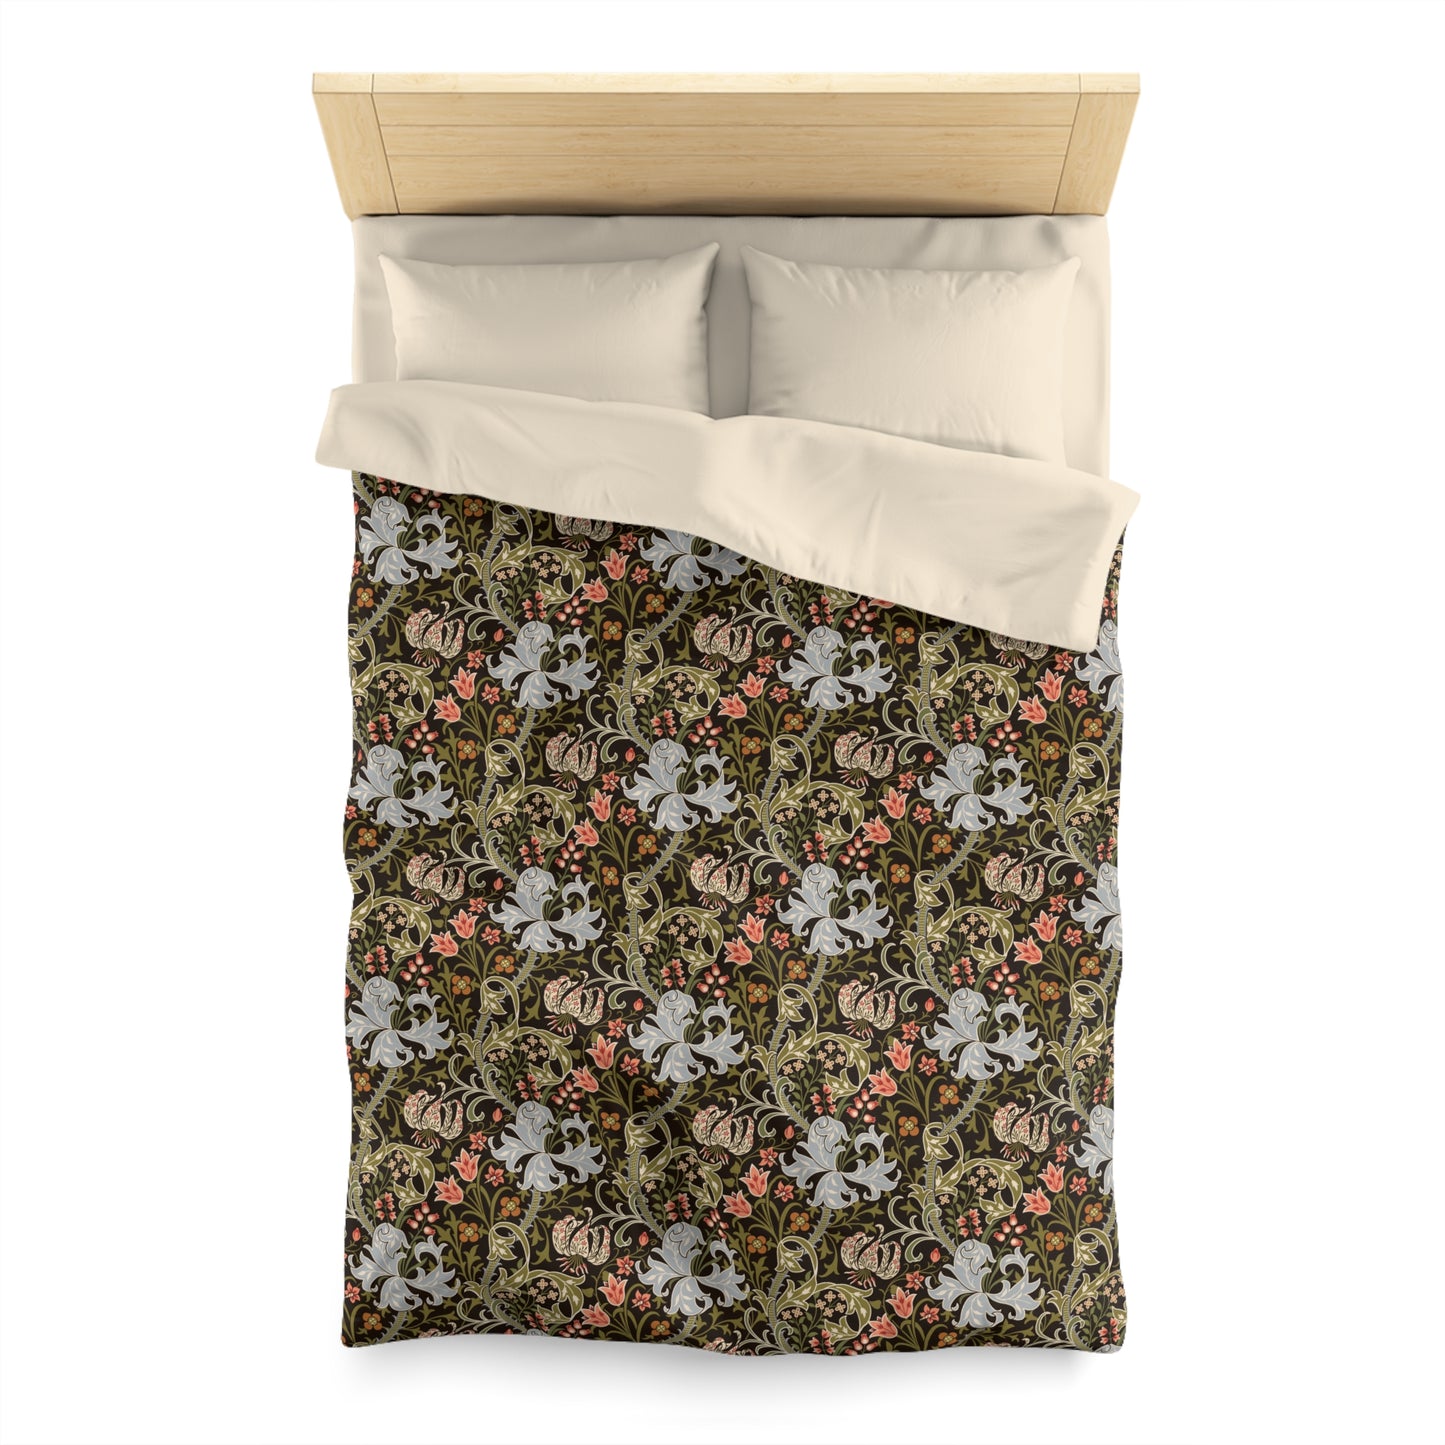 william-morris-co-duvet-cover-golden-lily-collection-midnight-3